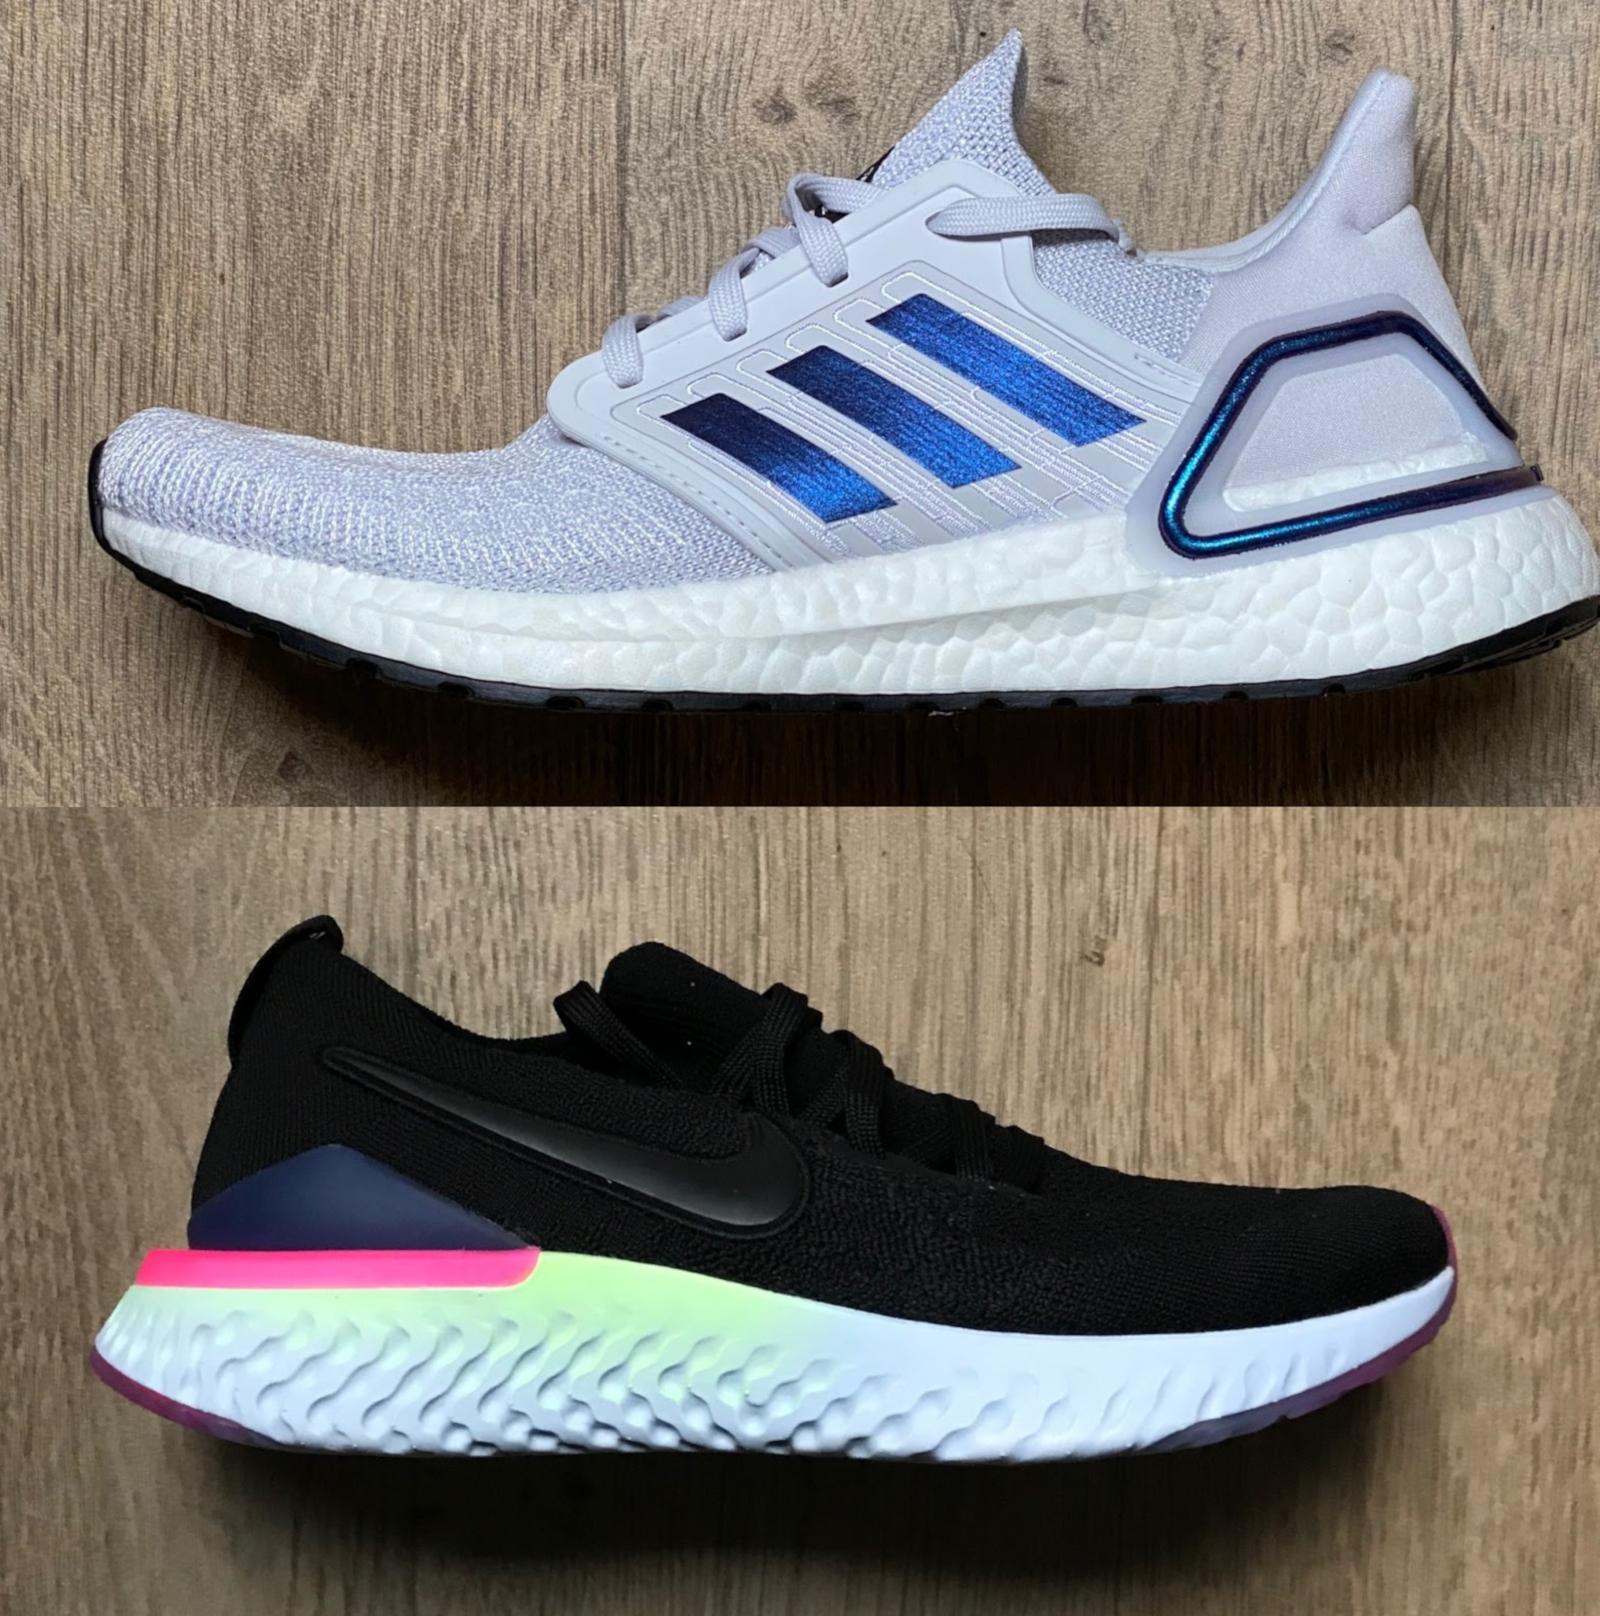 Ultraboost 20 Review, Facts, Comparison